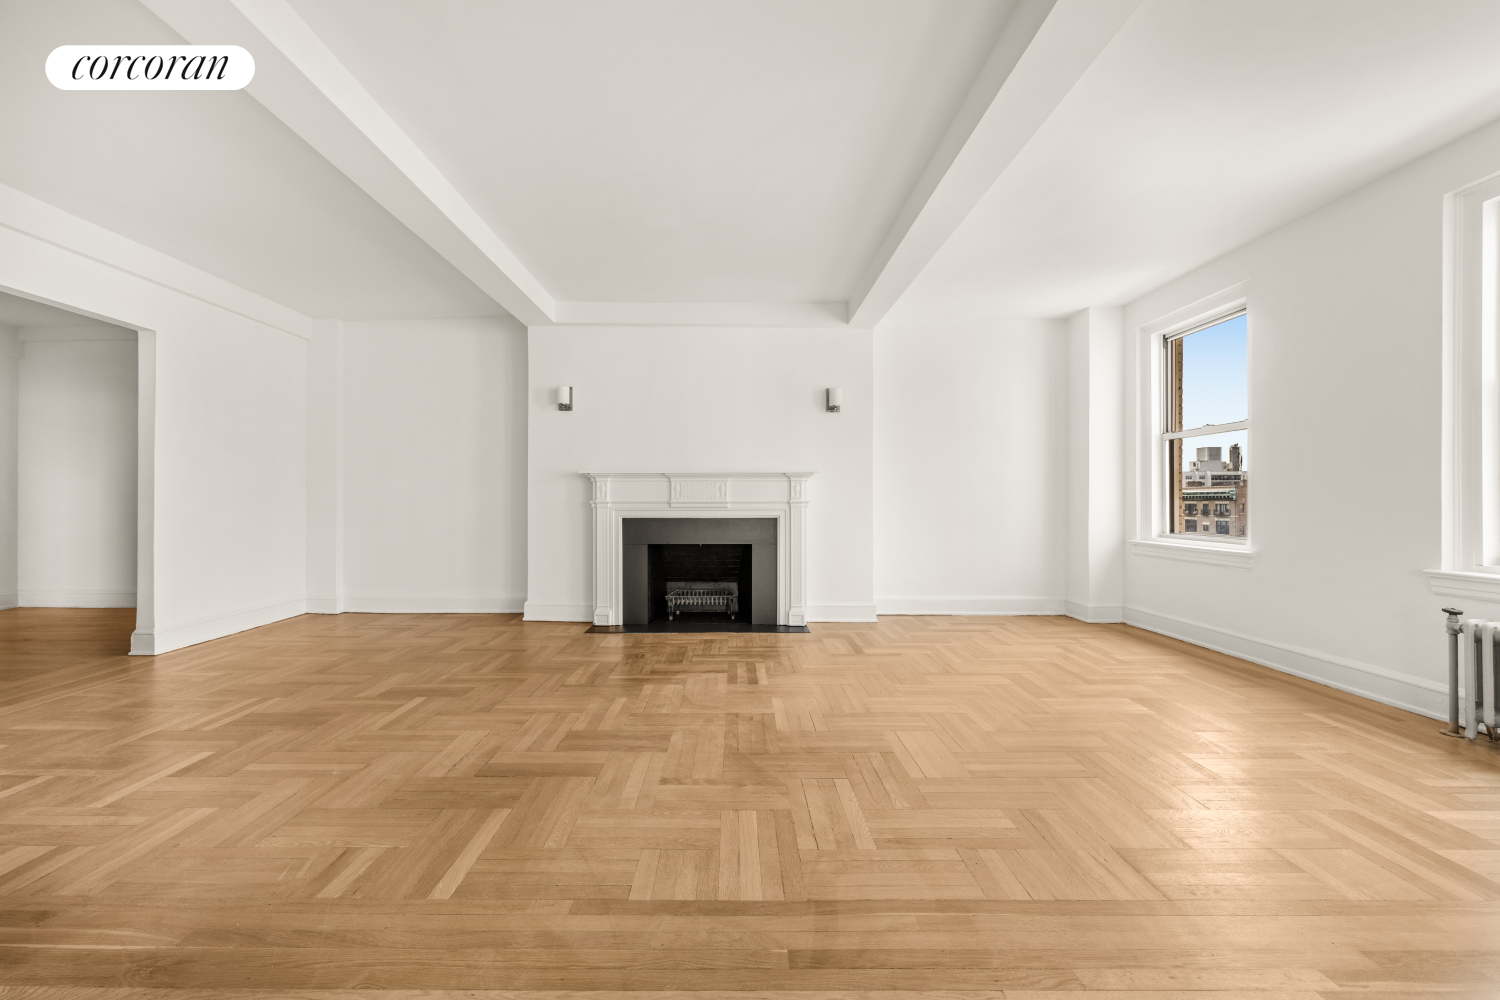 60 Gramercy Park 16A, Gramercy Park, Downtown, NYC - 3 Bedrooms  
2.5 Bathrooms  
6 Rooms - 